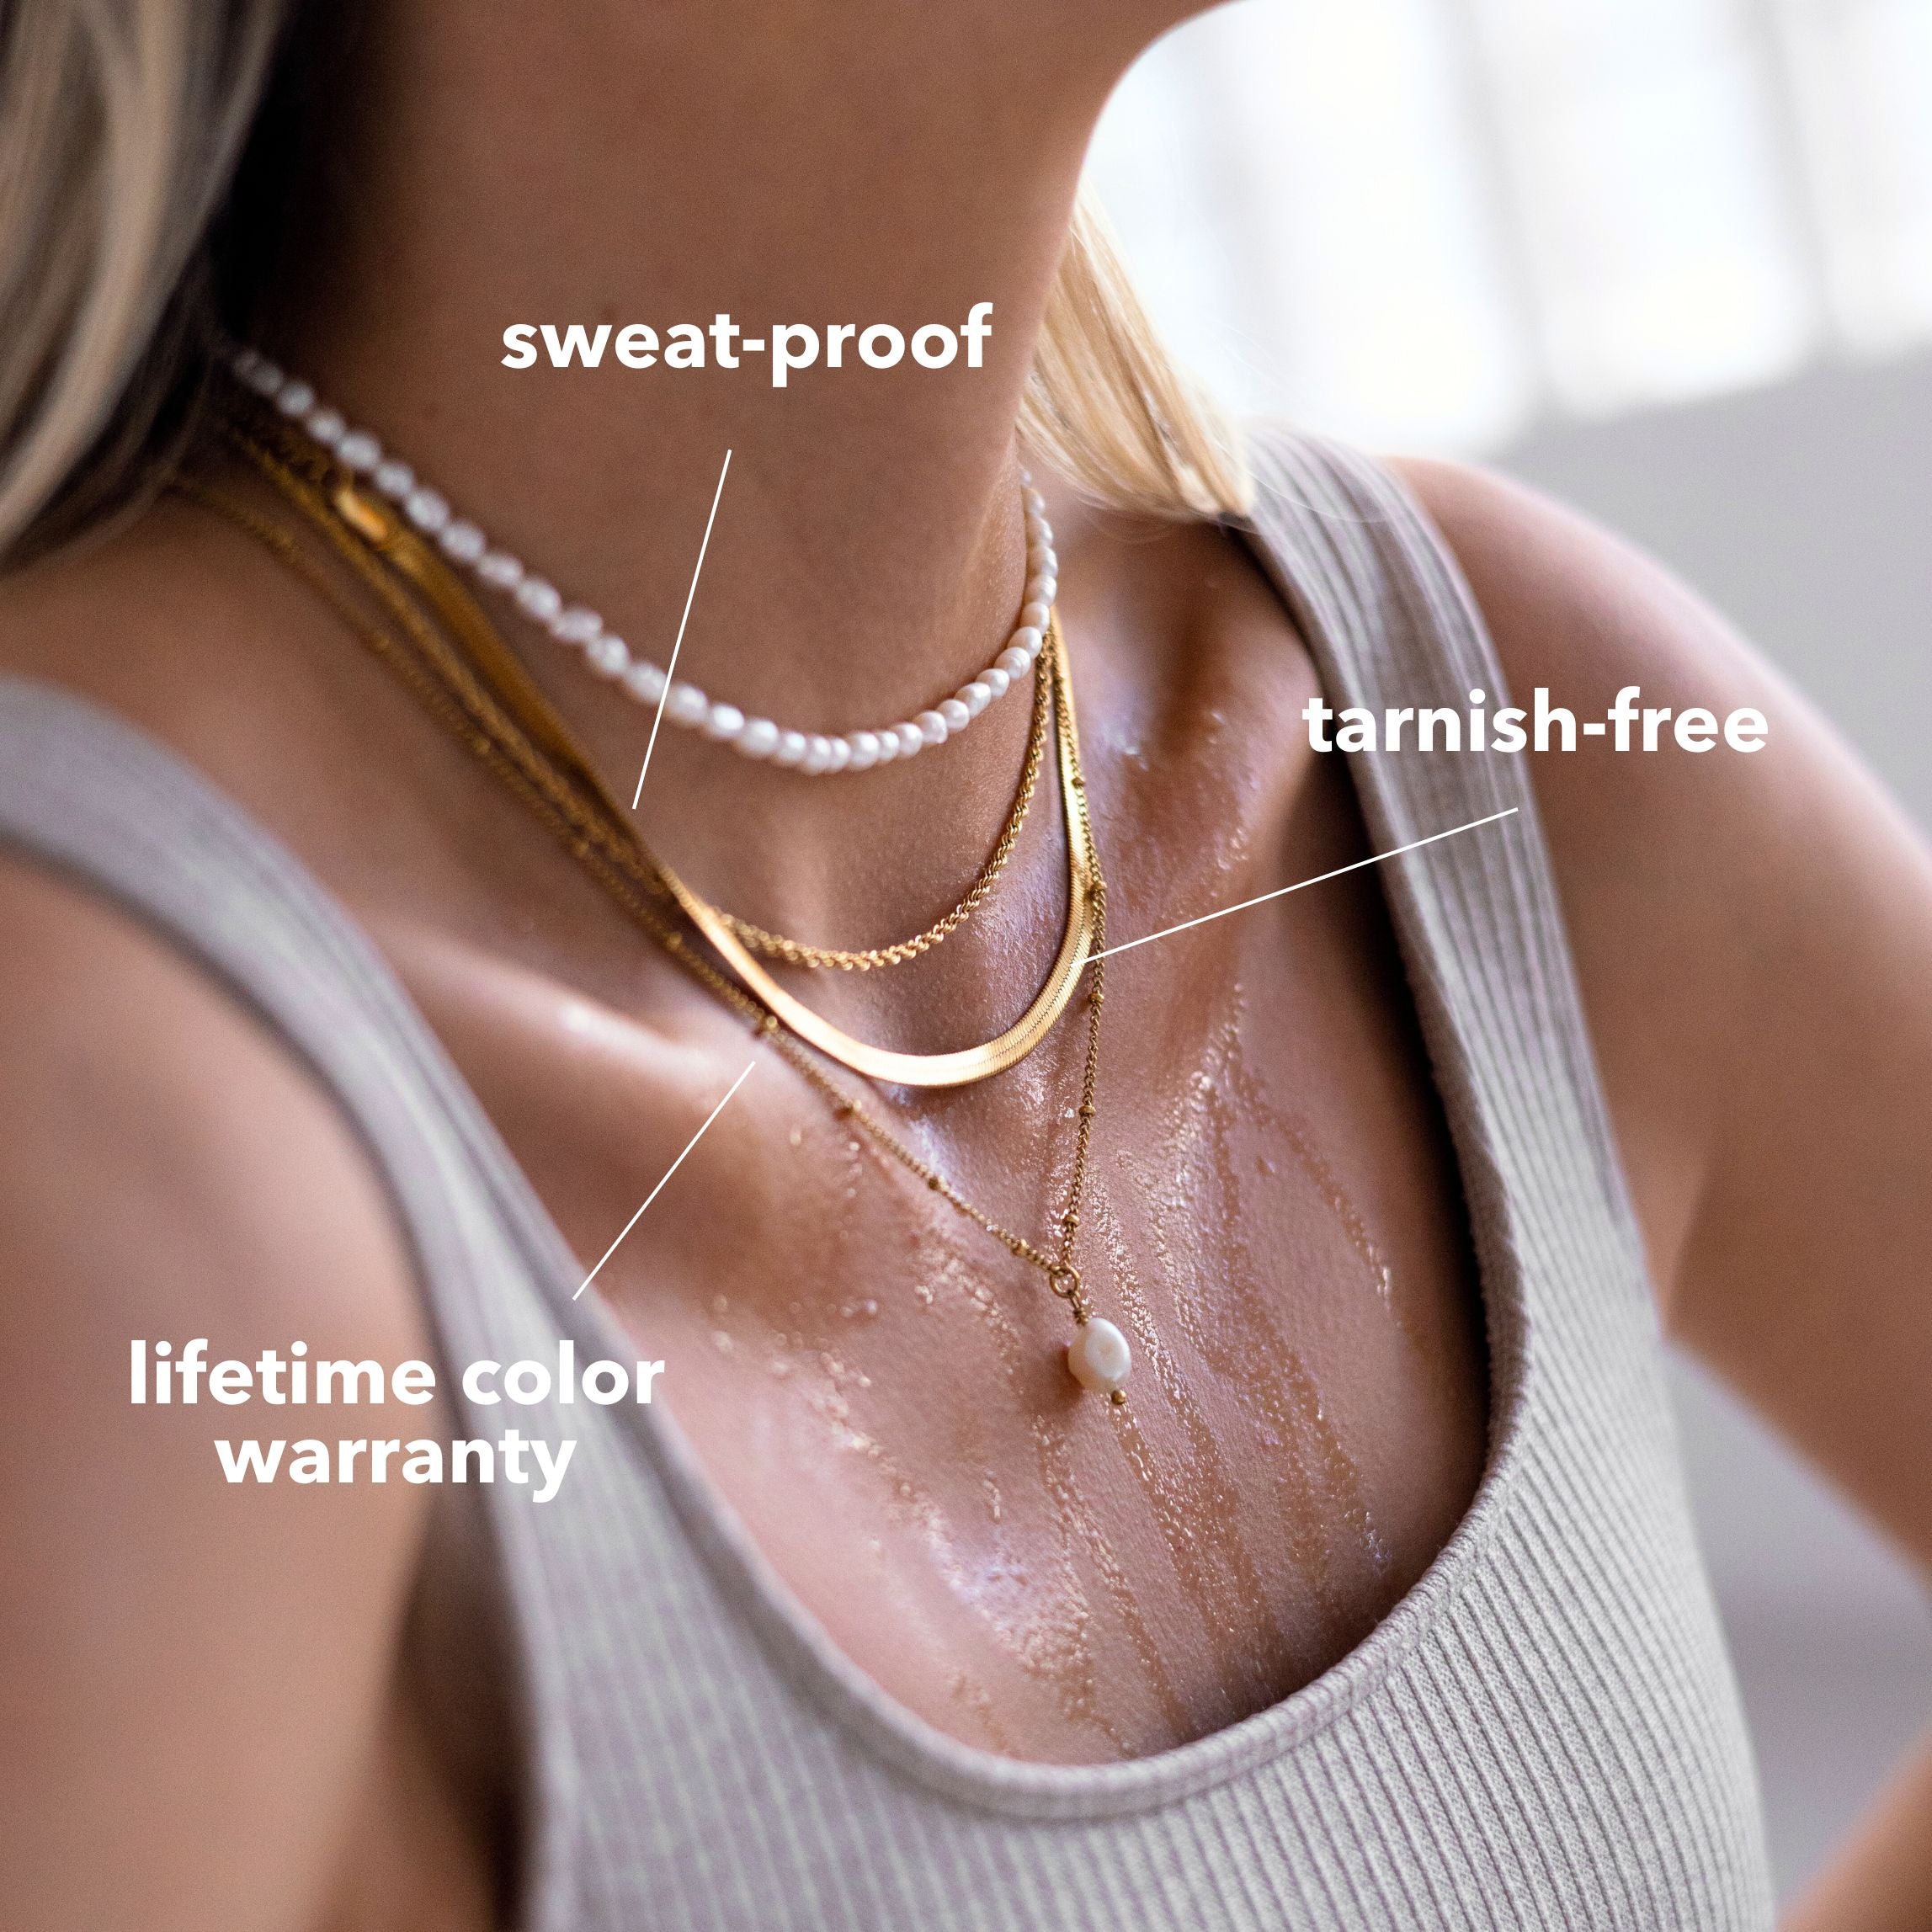 Sweatproof Jewelry You Can Workout With